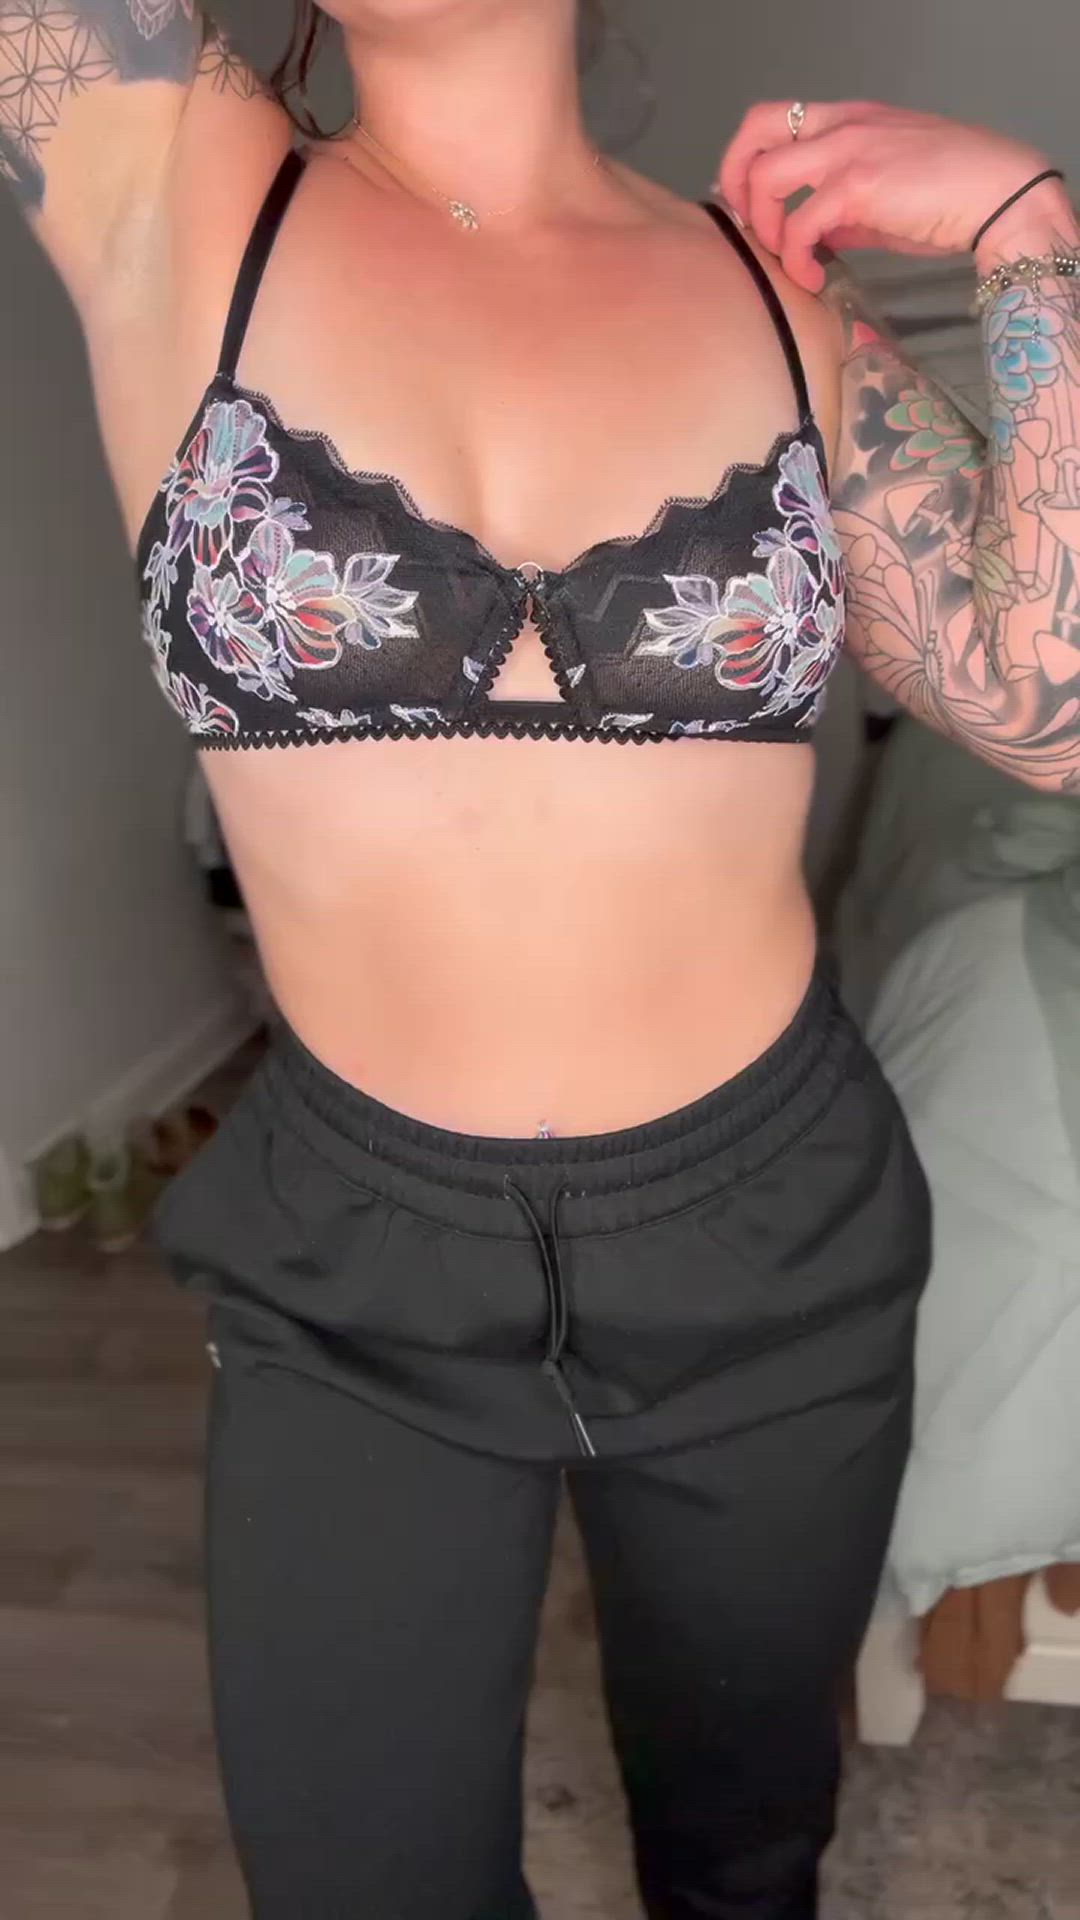 Amateur porn video with onlyfans model erinknightly <strong>@erinknightly</strong>